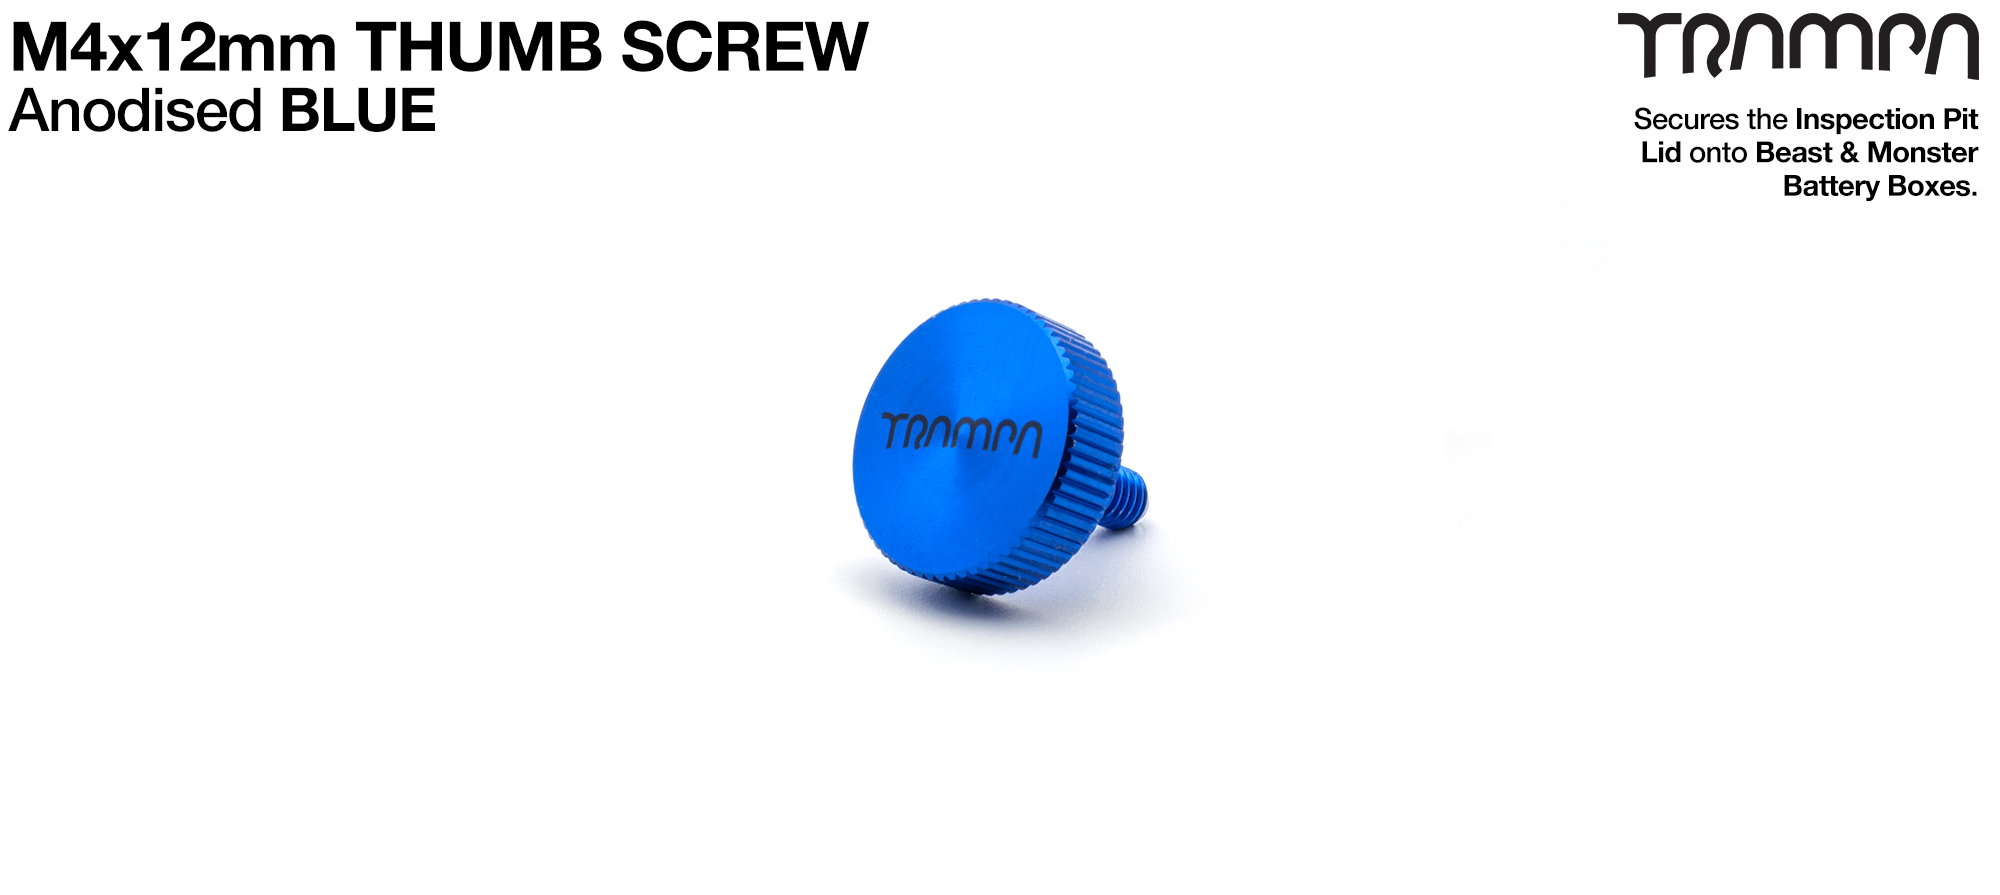 M4x 12mm Anodised Aluminium THUMB SCREW - colour co-ordinatingly secures the Inspection Pit lid on to the Battery Box - BLUE